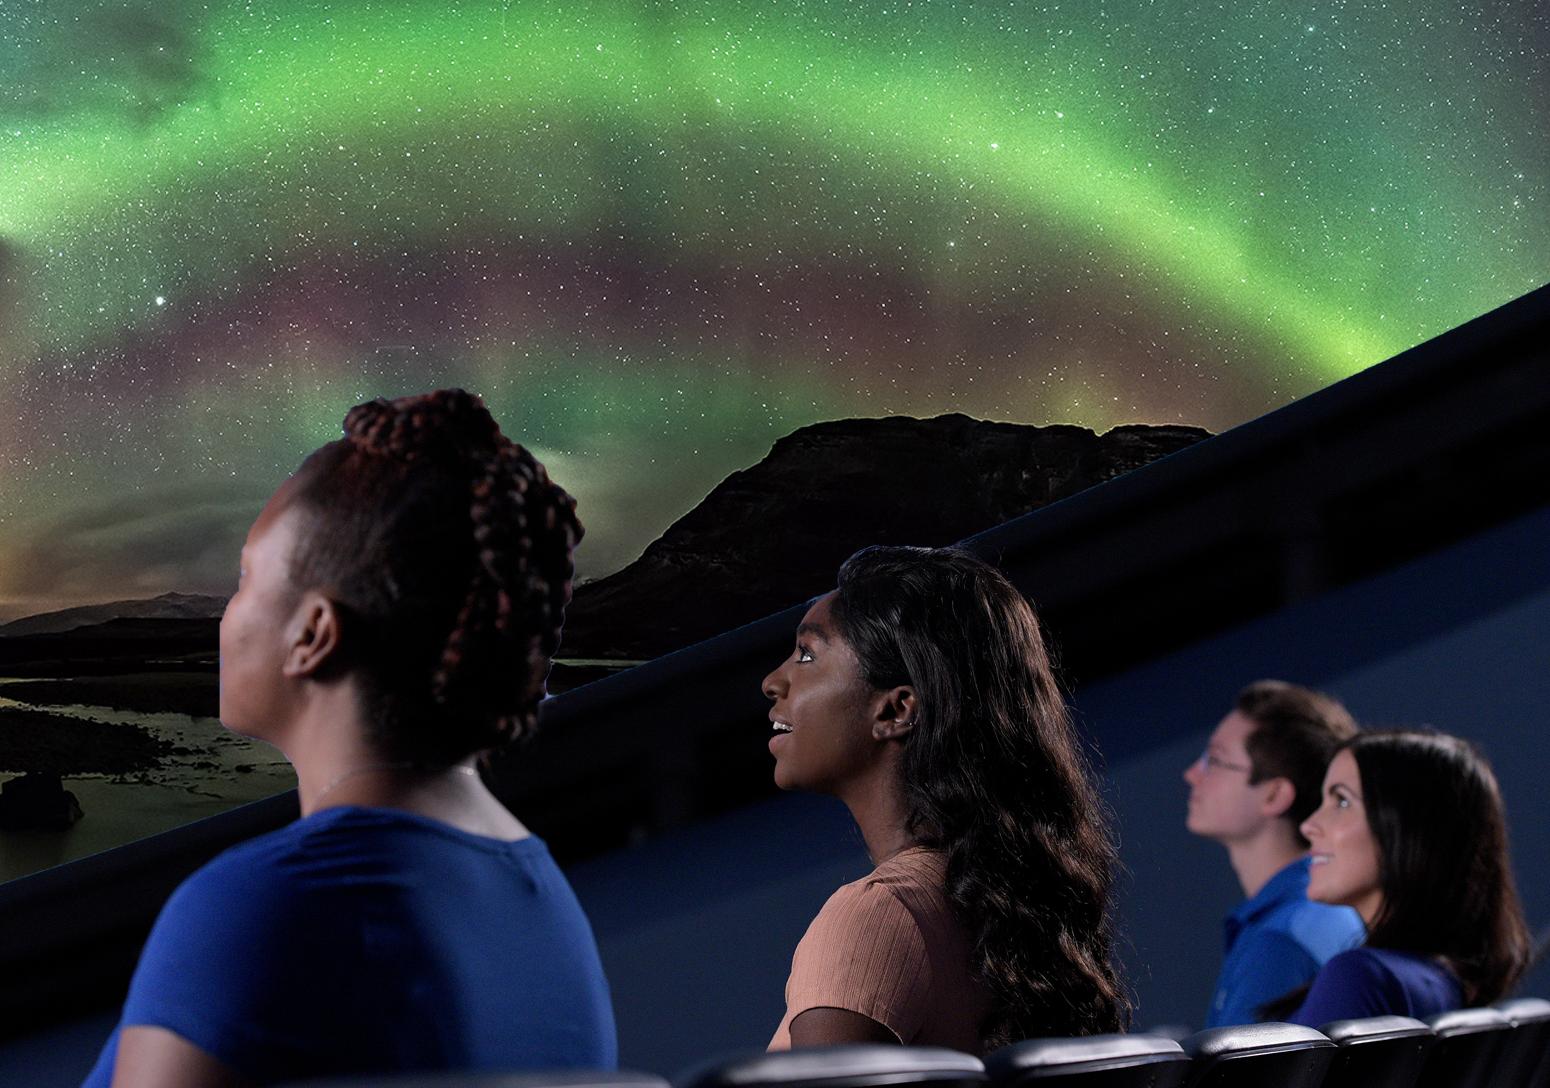 Three audience members sit in a row from left to right looking up at a screen showing a projection of bright glowing green lights